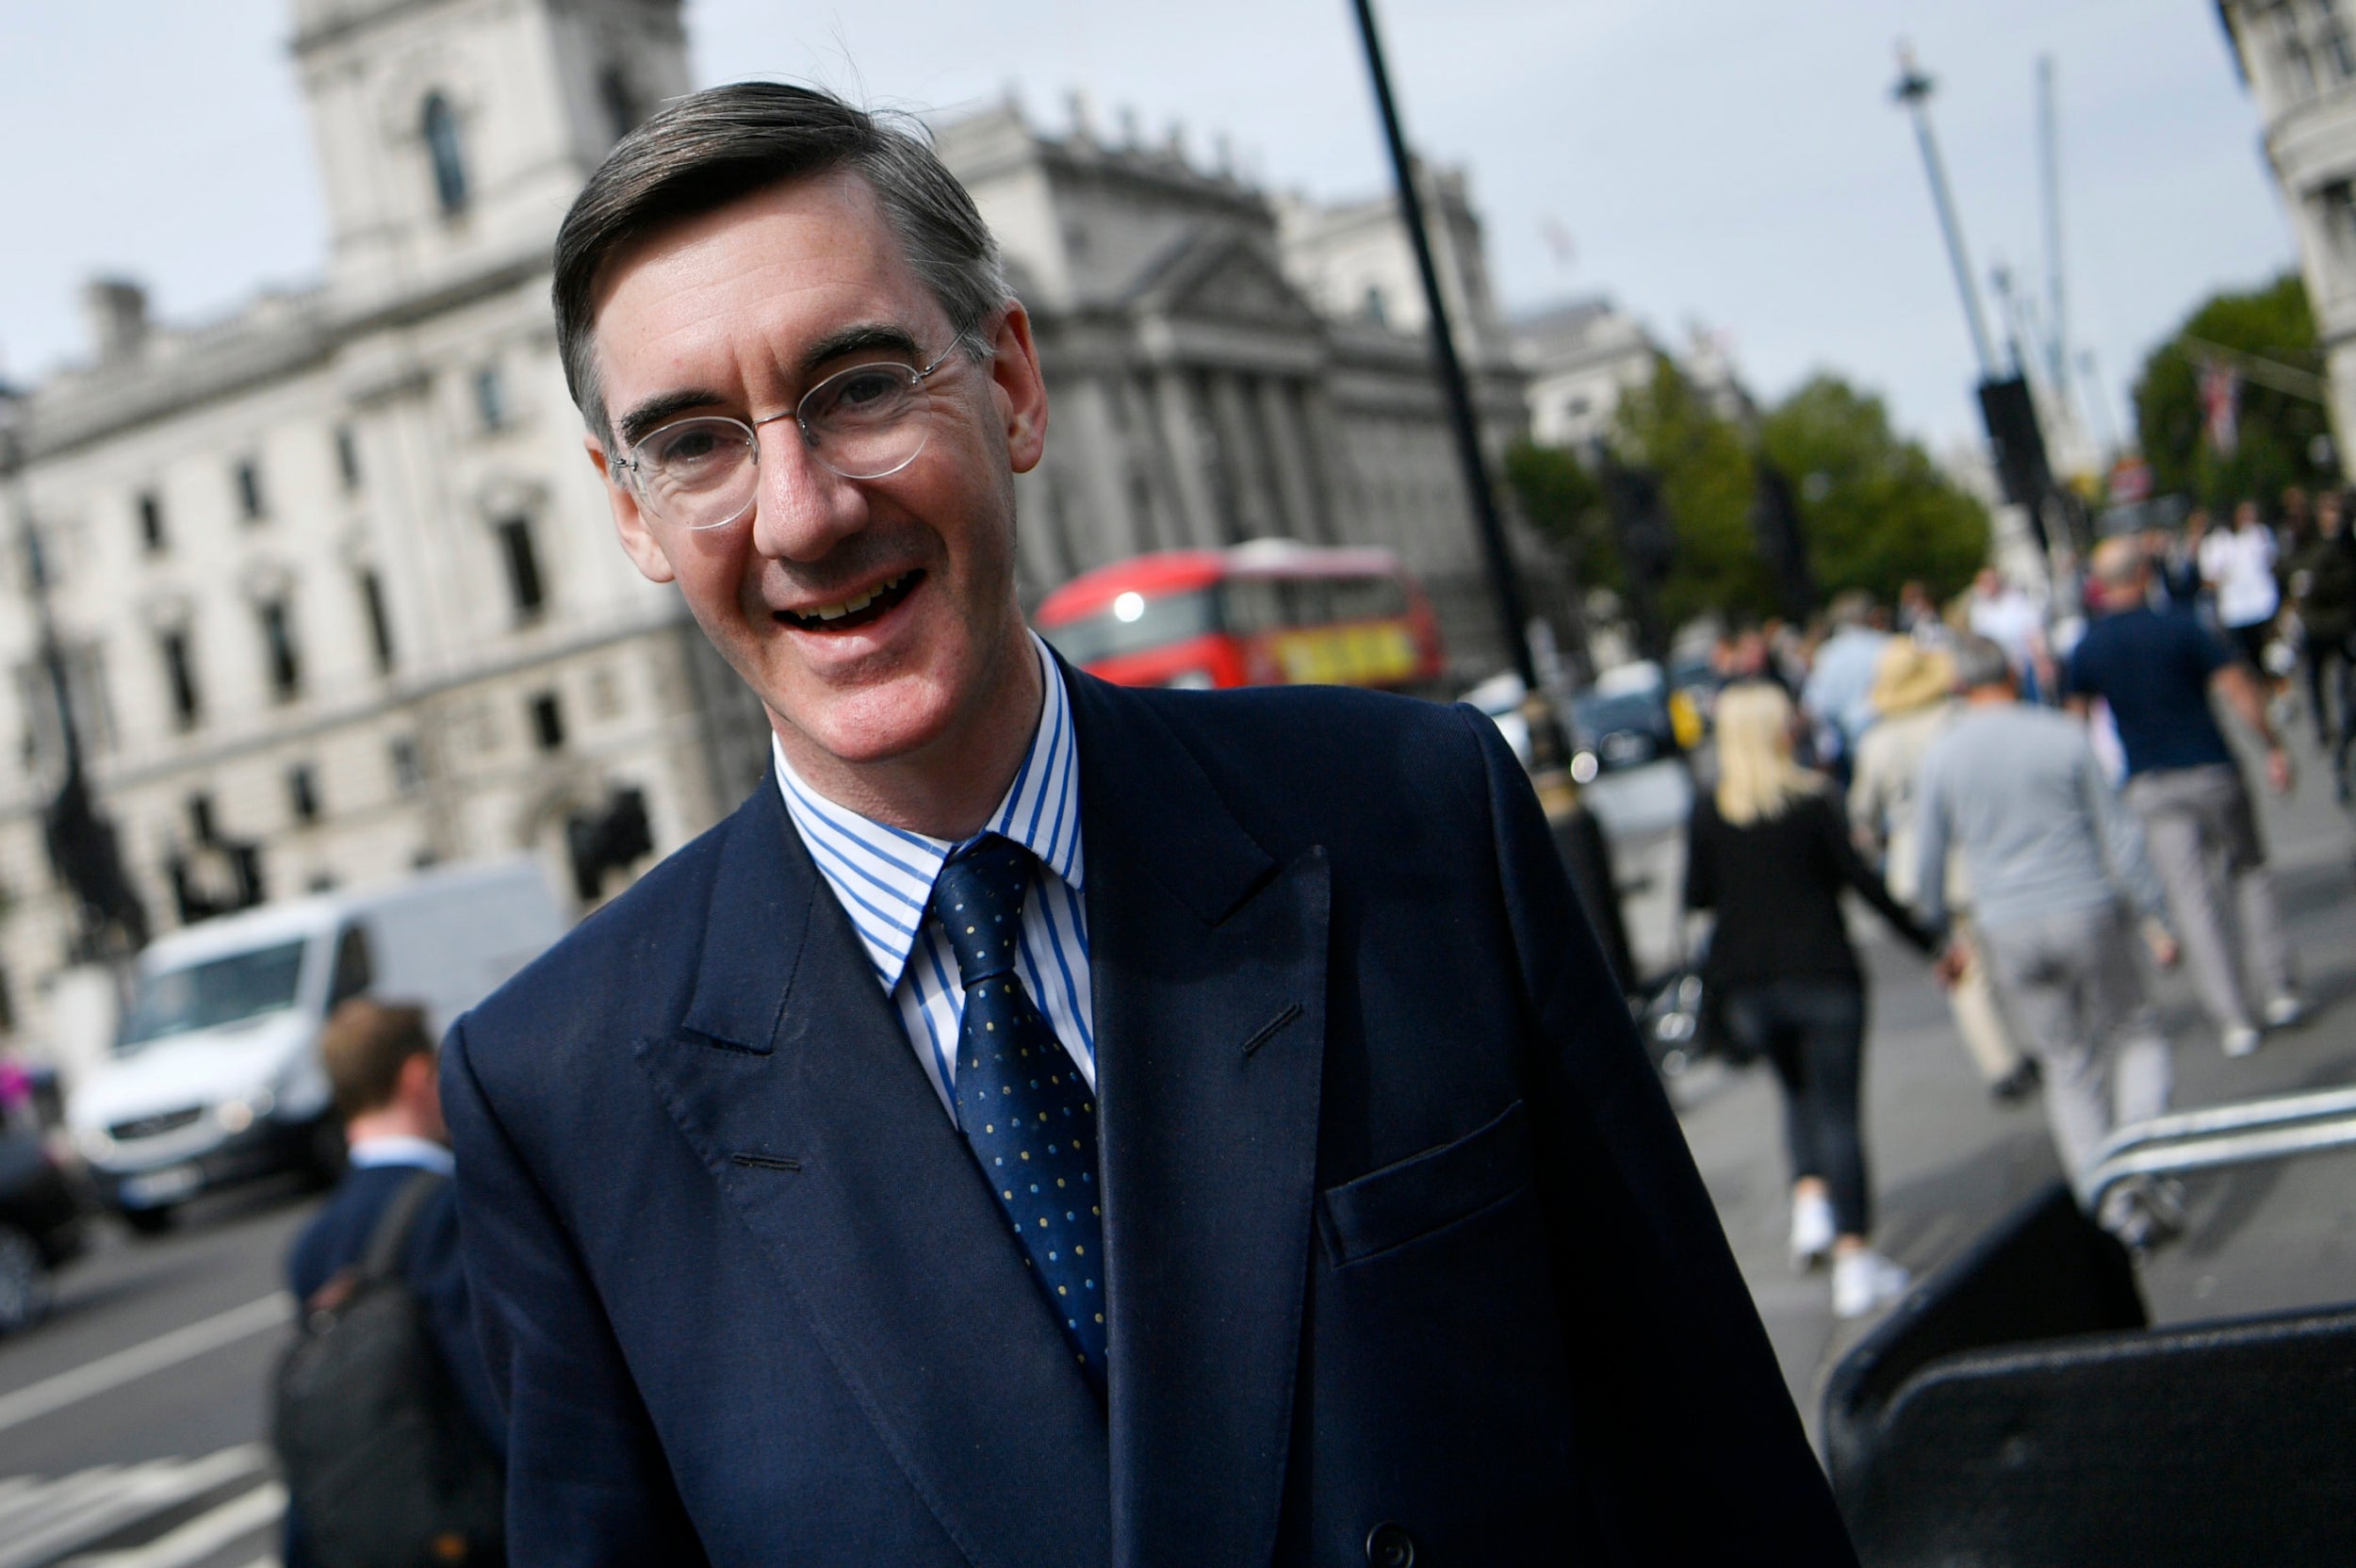 Jacob Rees-Mogg, one of the leaders of the 'full-fat' Brexit tendency in the Conservative Party, would be happy to leave and be treated just like any other non-EU country